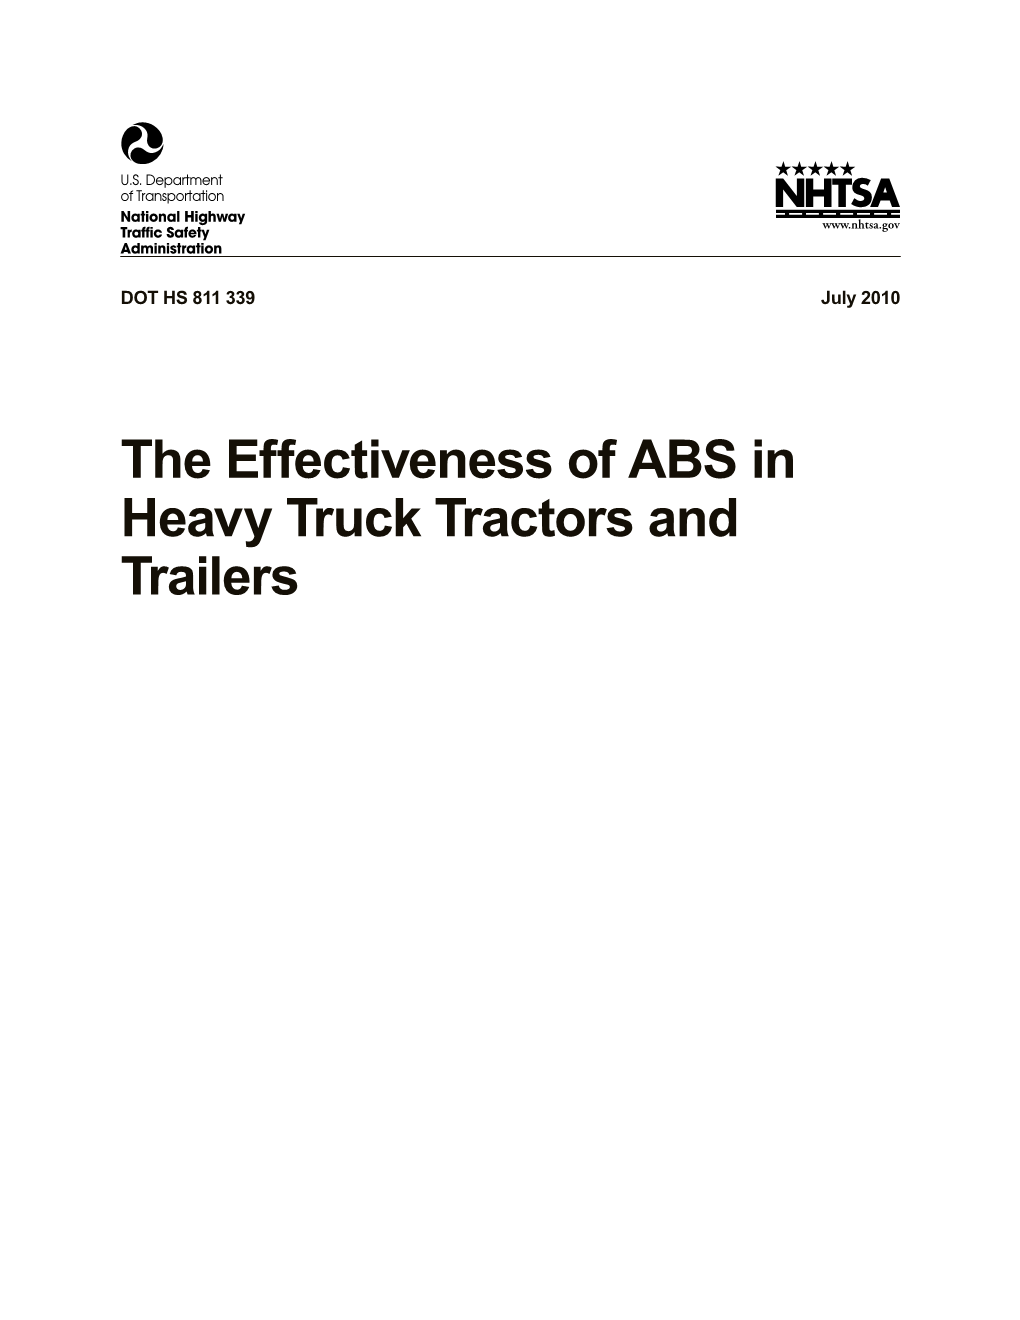 The Effectiveness of ABS in Heavy Truck Tractors and Trailers DISCLAIMER